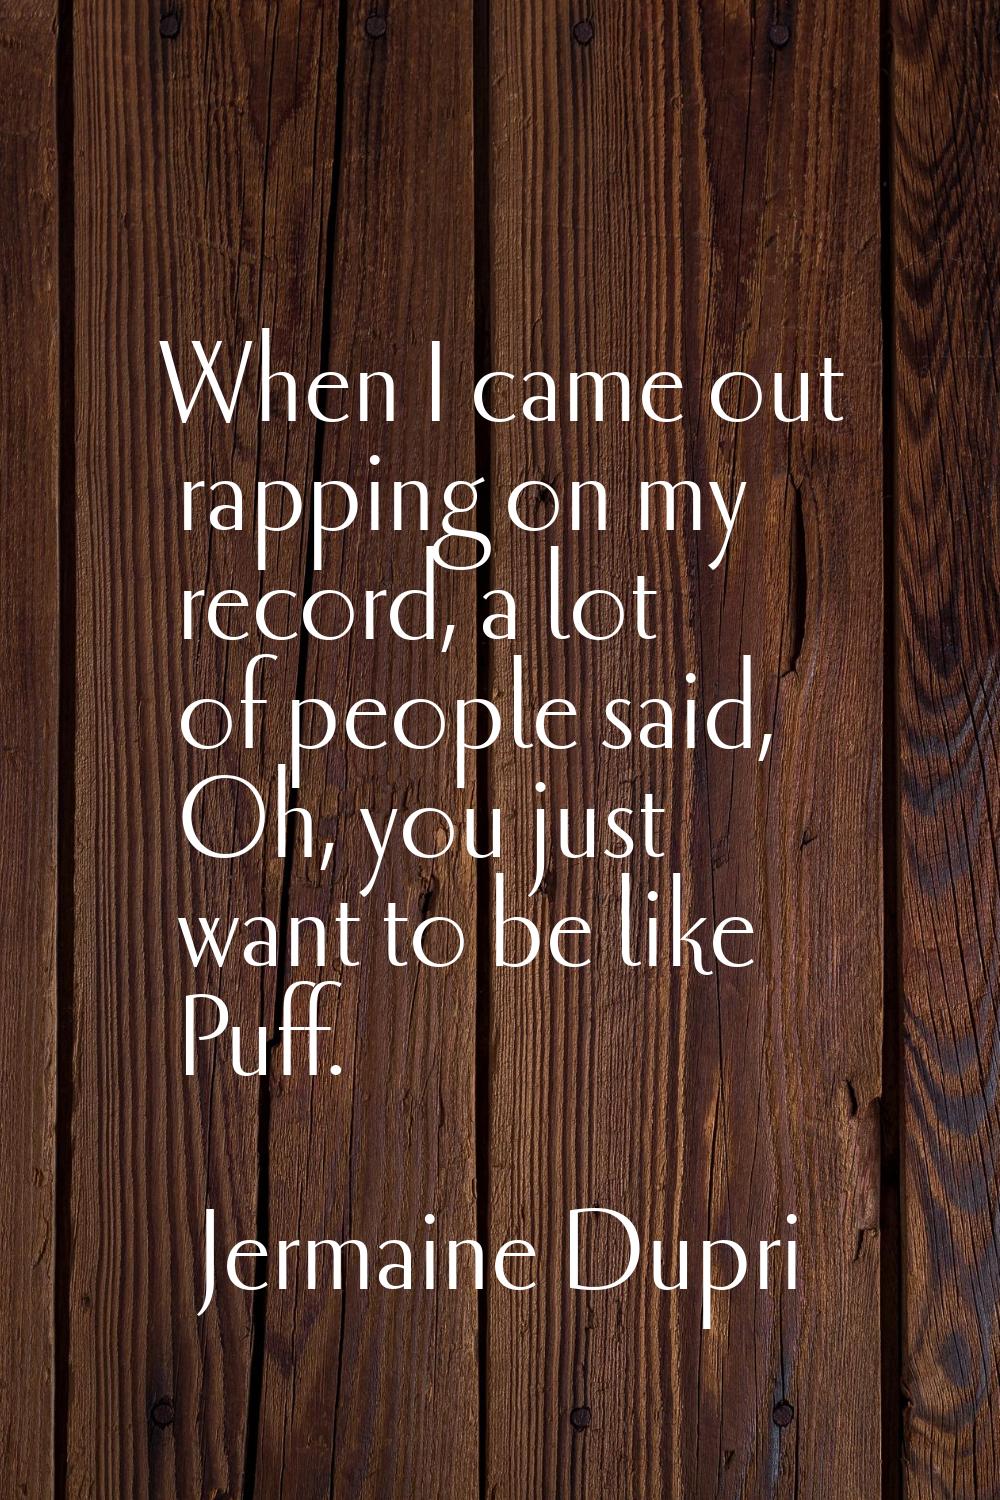 When I came out rapping on my record, a lot of people said, Oh, you just want to be like Puff.